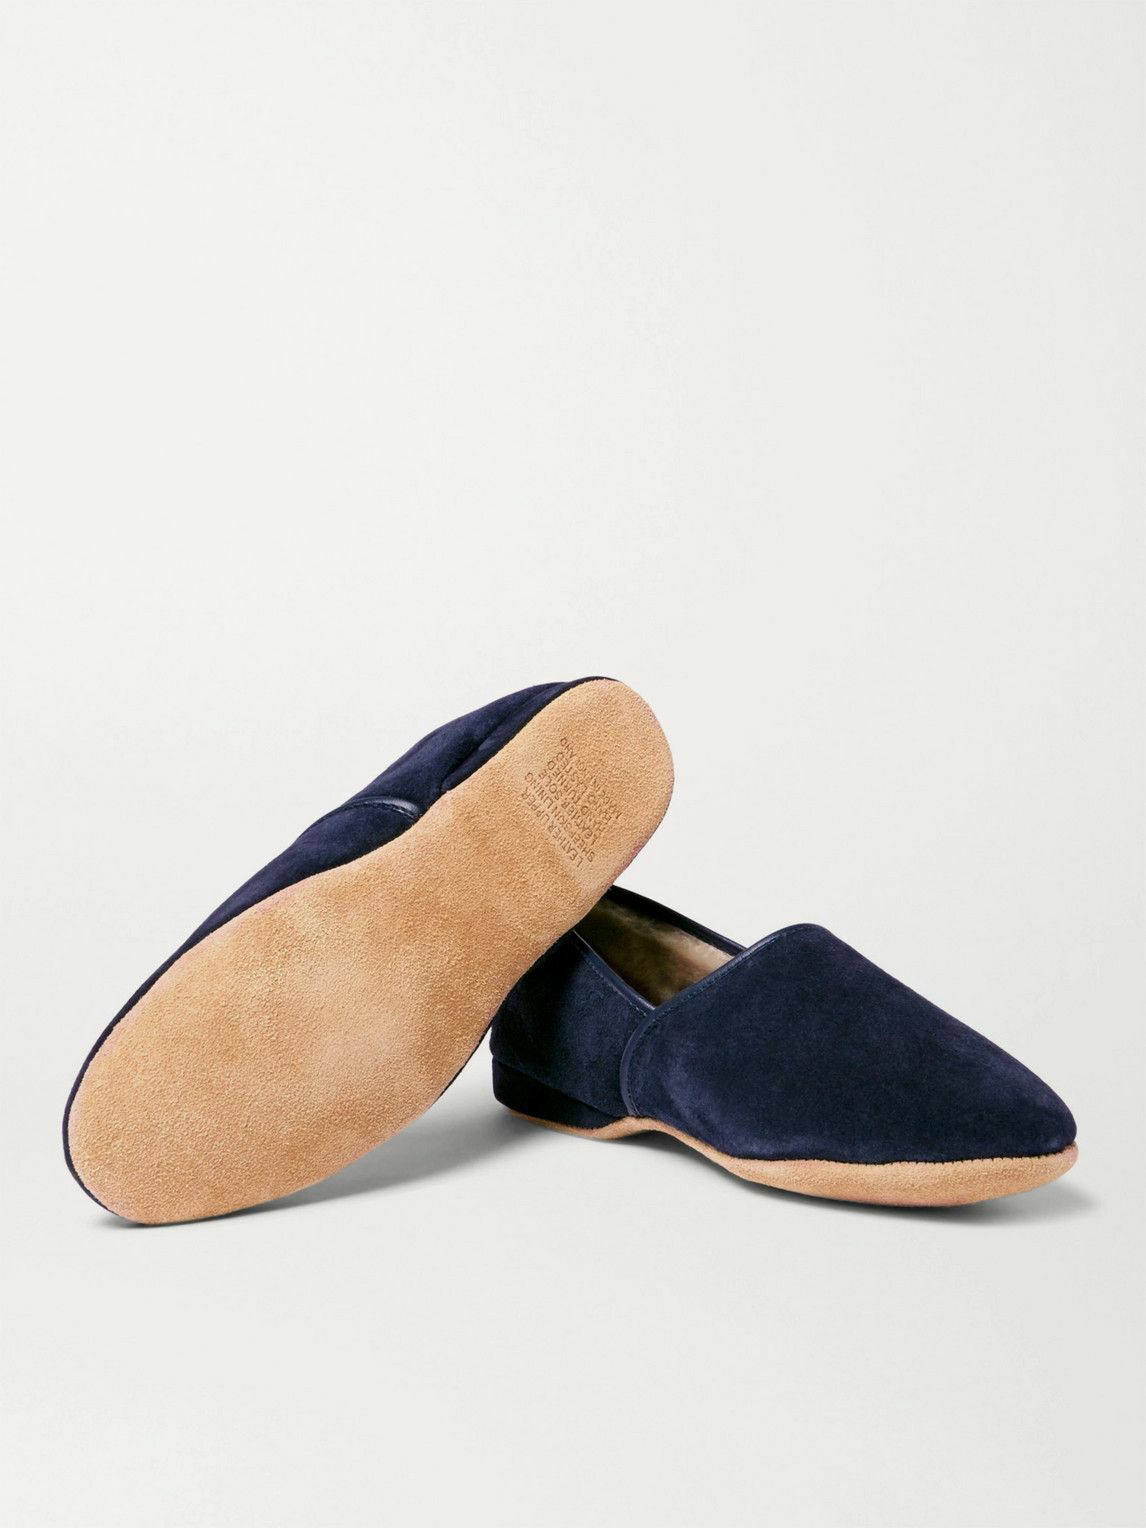 Crawford Shearling-Lined Suede Slippers